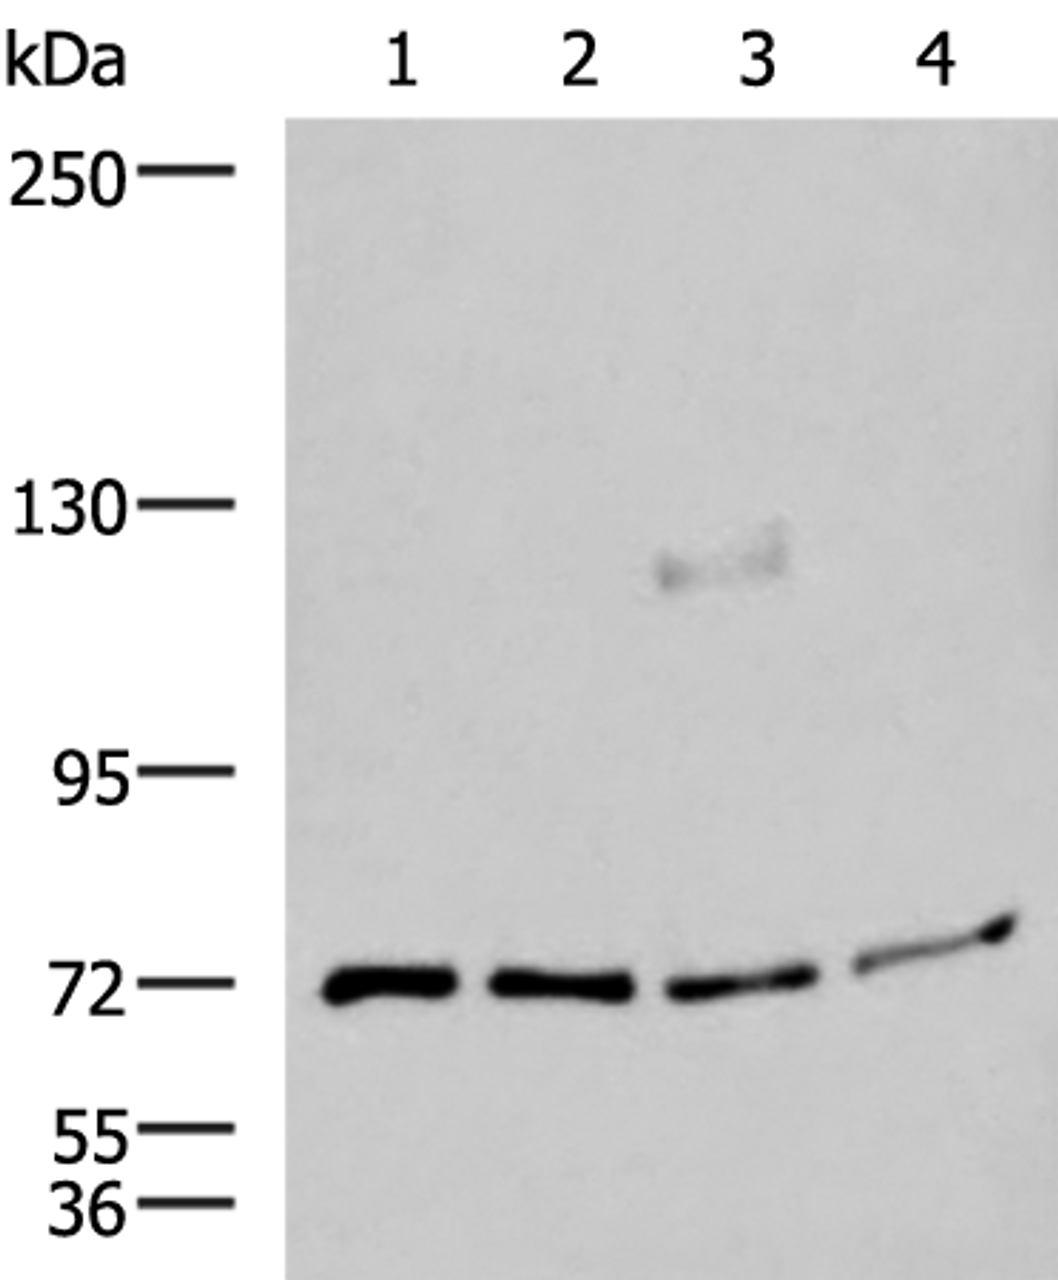 Western blot analysis of A549 A172 TM4 and PC3 cell lysates  using ASTE1 Polyclonal Antibody at dilution of 1:600